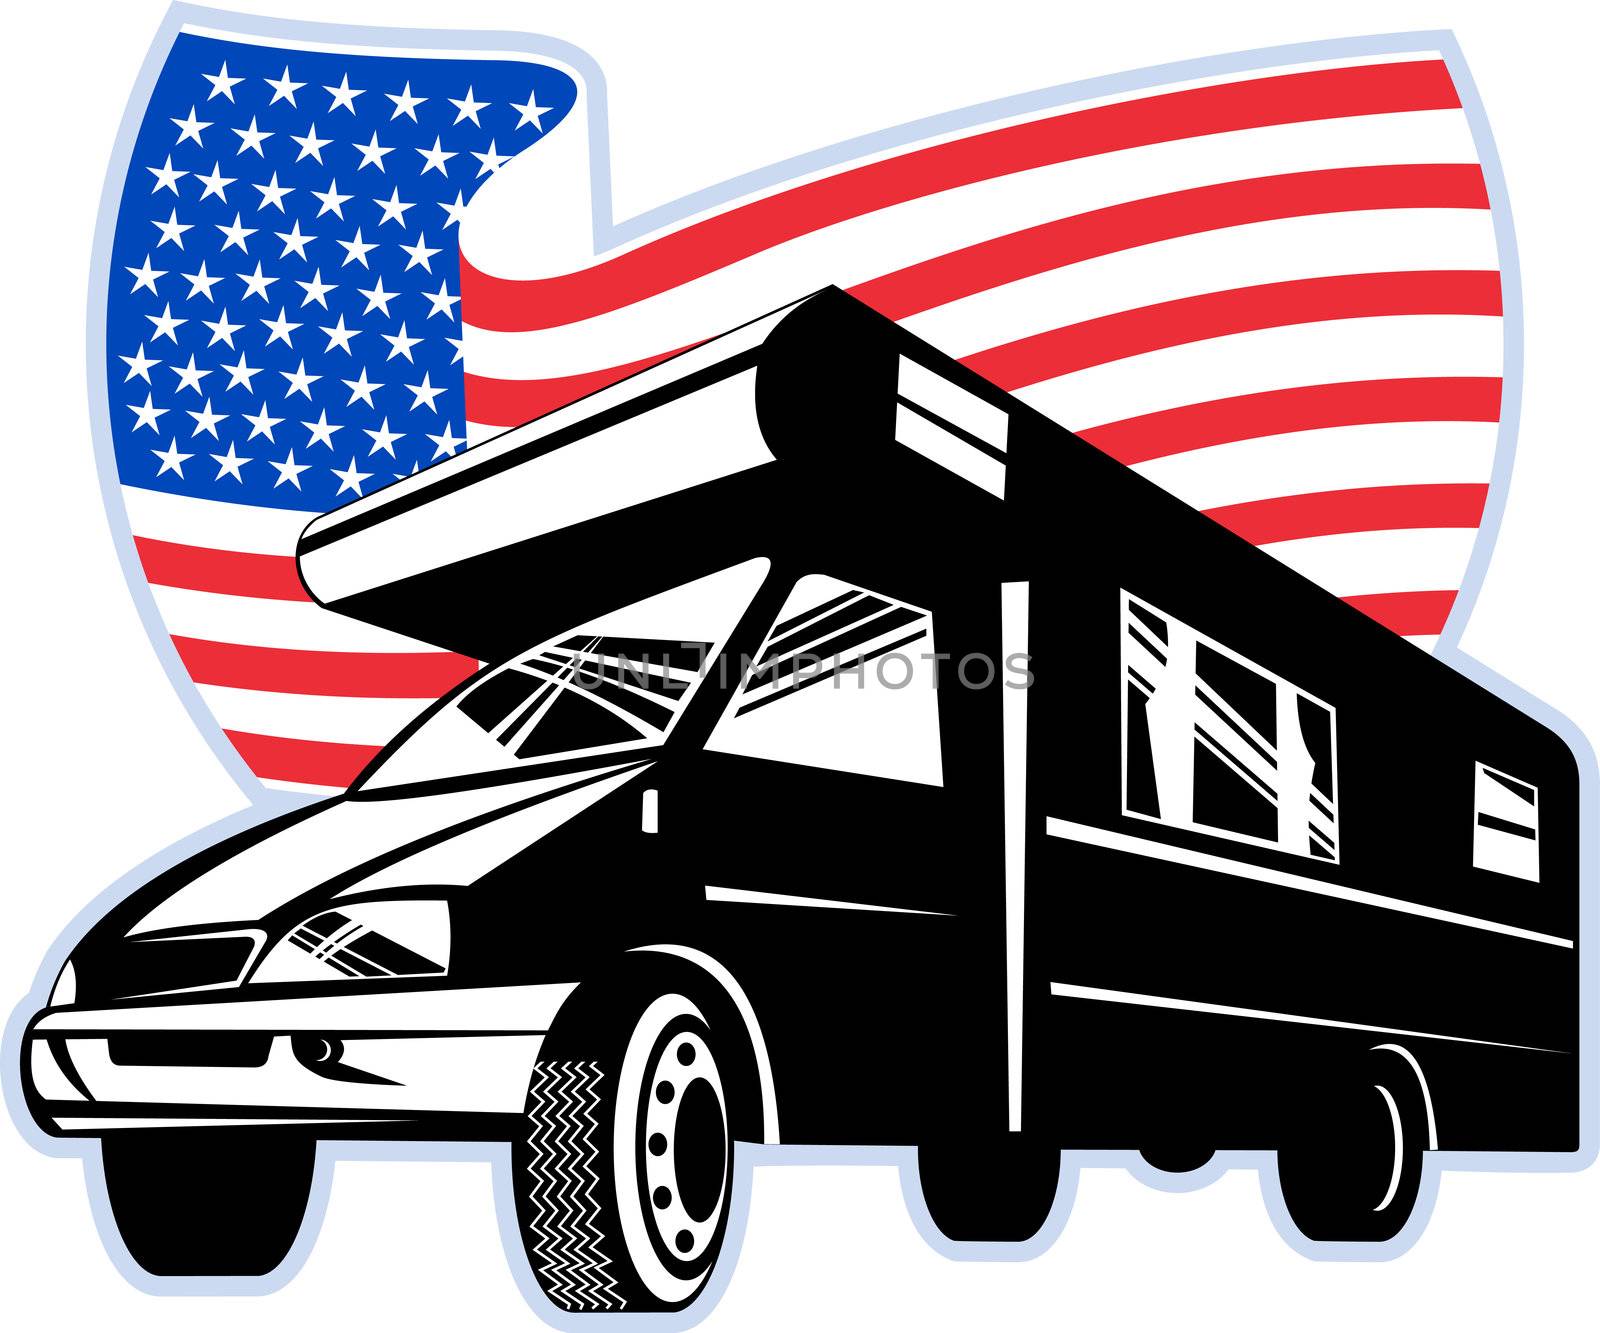 Camper van with american flag stars and stripes by patrimonio